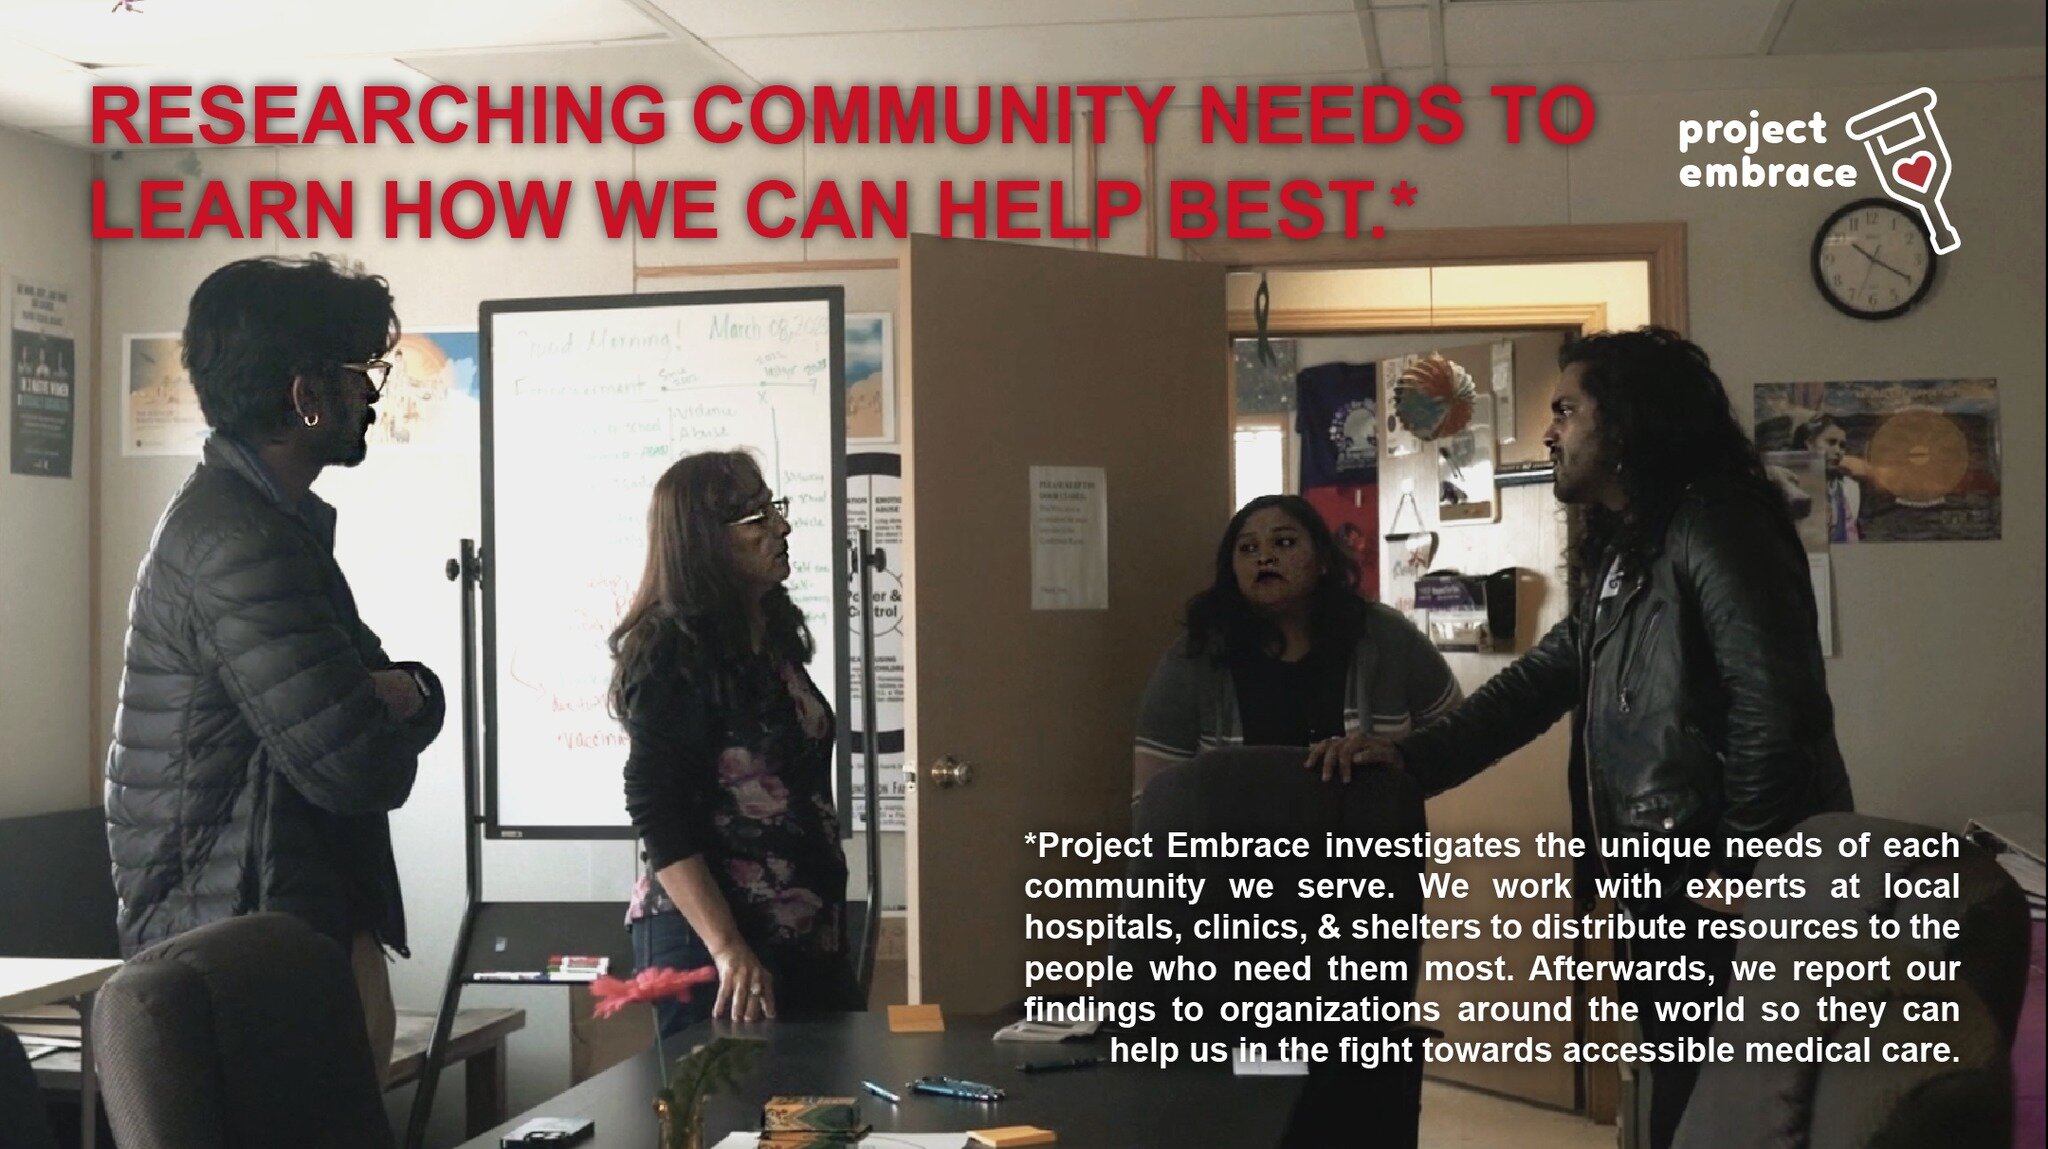 RESEARCHING COMMUNITY NEEDS TO LEARN HOW WE CAN HELP BEST.*

---

*Project Embrace investigates the unique needs of each community we serve. We work with experts at local hospitals, clinics, &amp; shelters to distribute resources to the people who ne